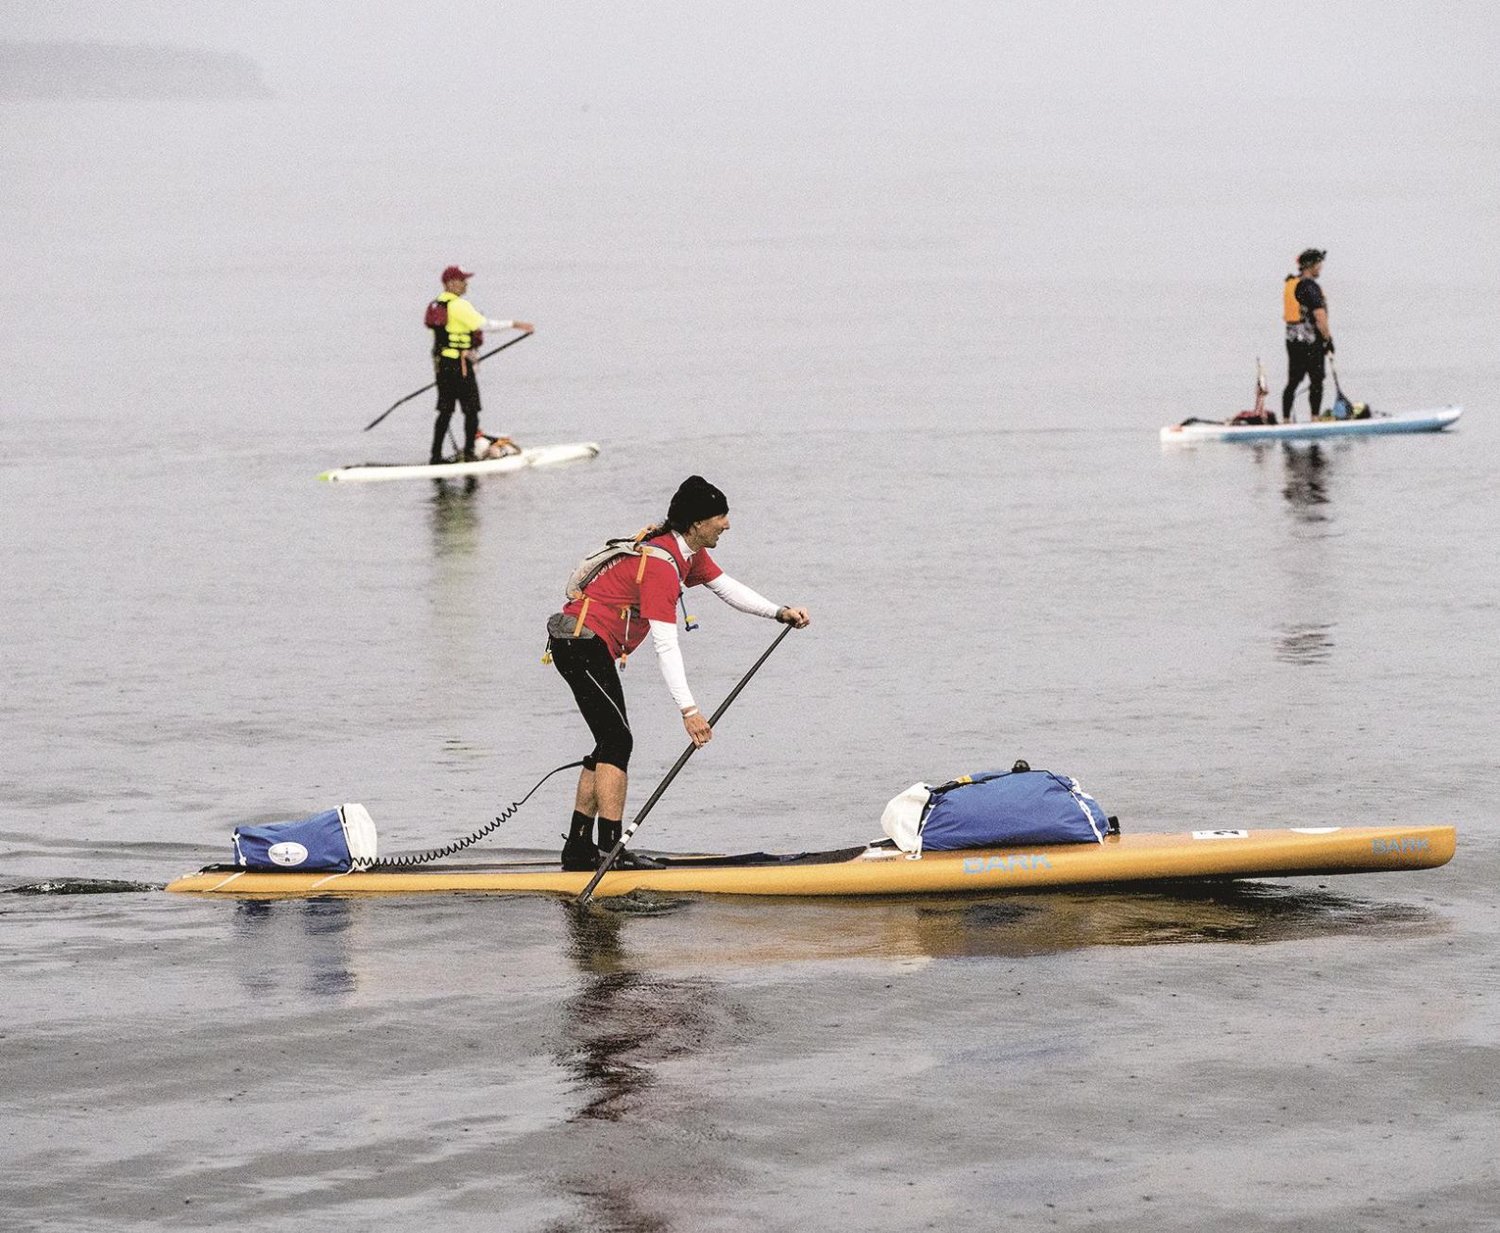 Stand-up paddleboarders, including Karl Kruger of Orcas Island (foreground), started out in June to cross the Strait of Juan de Fuca and paddle on to Victoria for the first leg of the third Race to Alaska, the 750-mile race from Port Townsend to Ketchikan, Alaska. Kruger went on to become the first person to finish the R2AK race on a stand-up paddleboard.